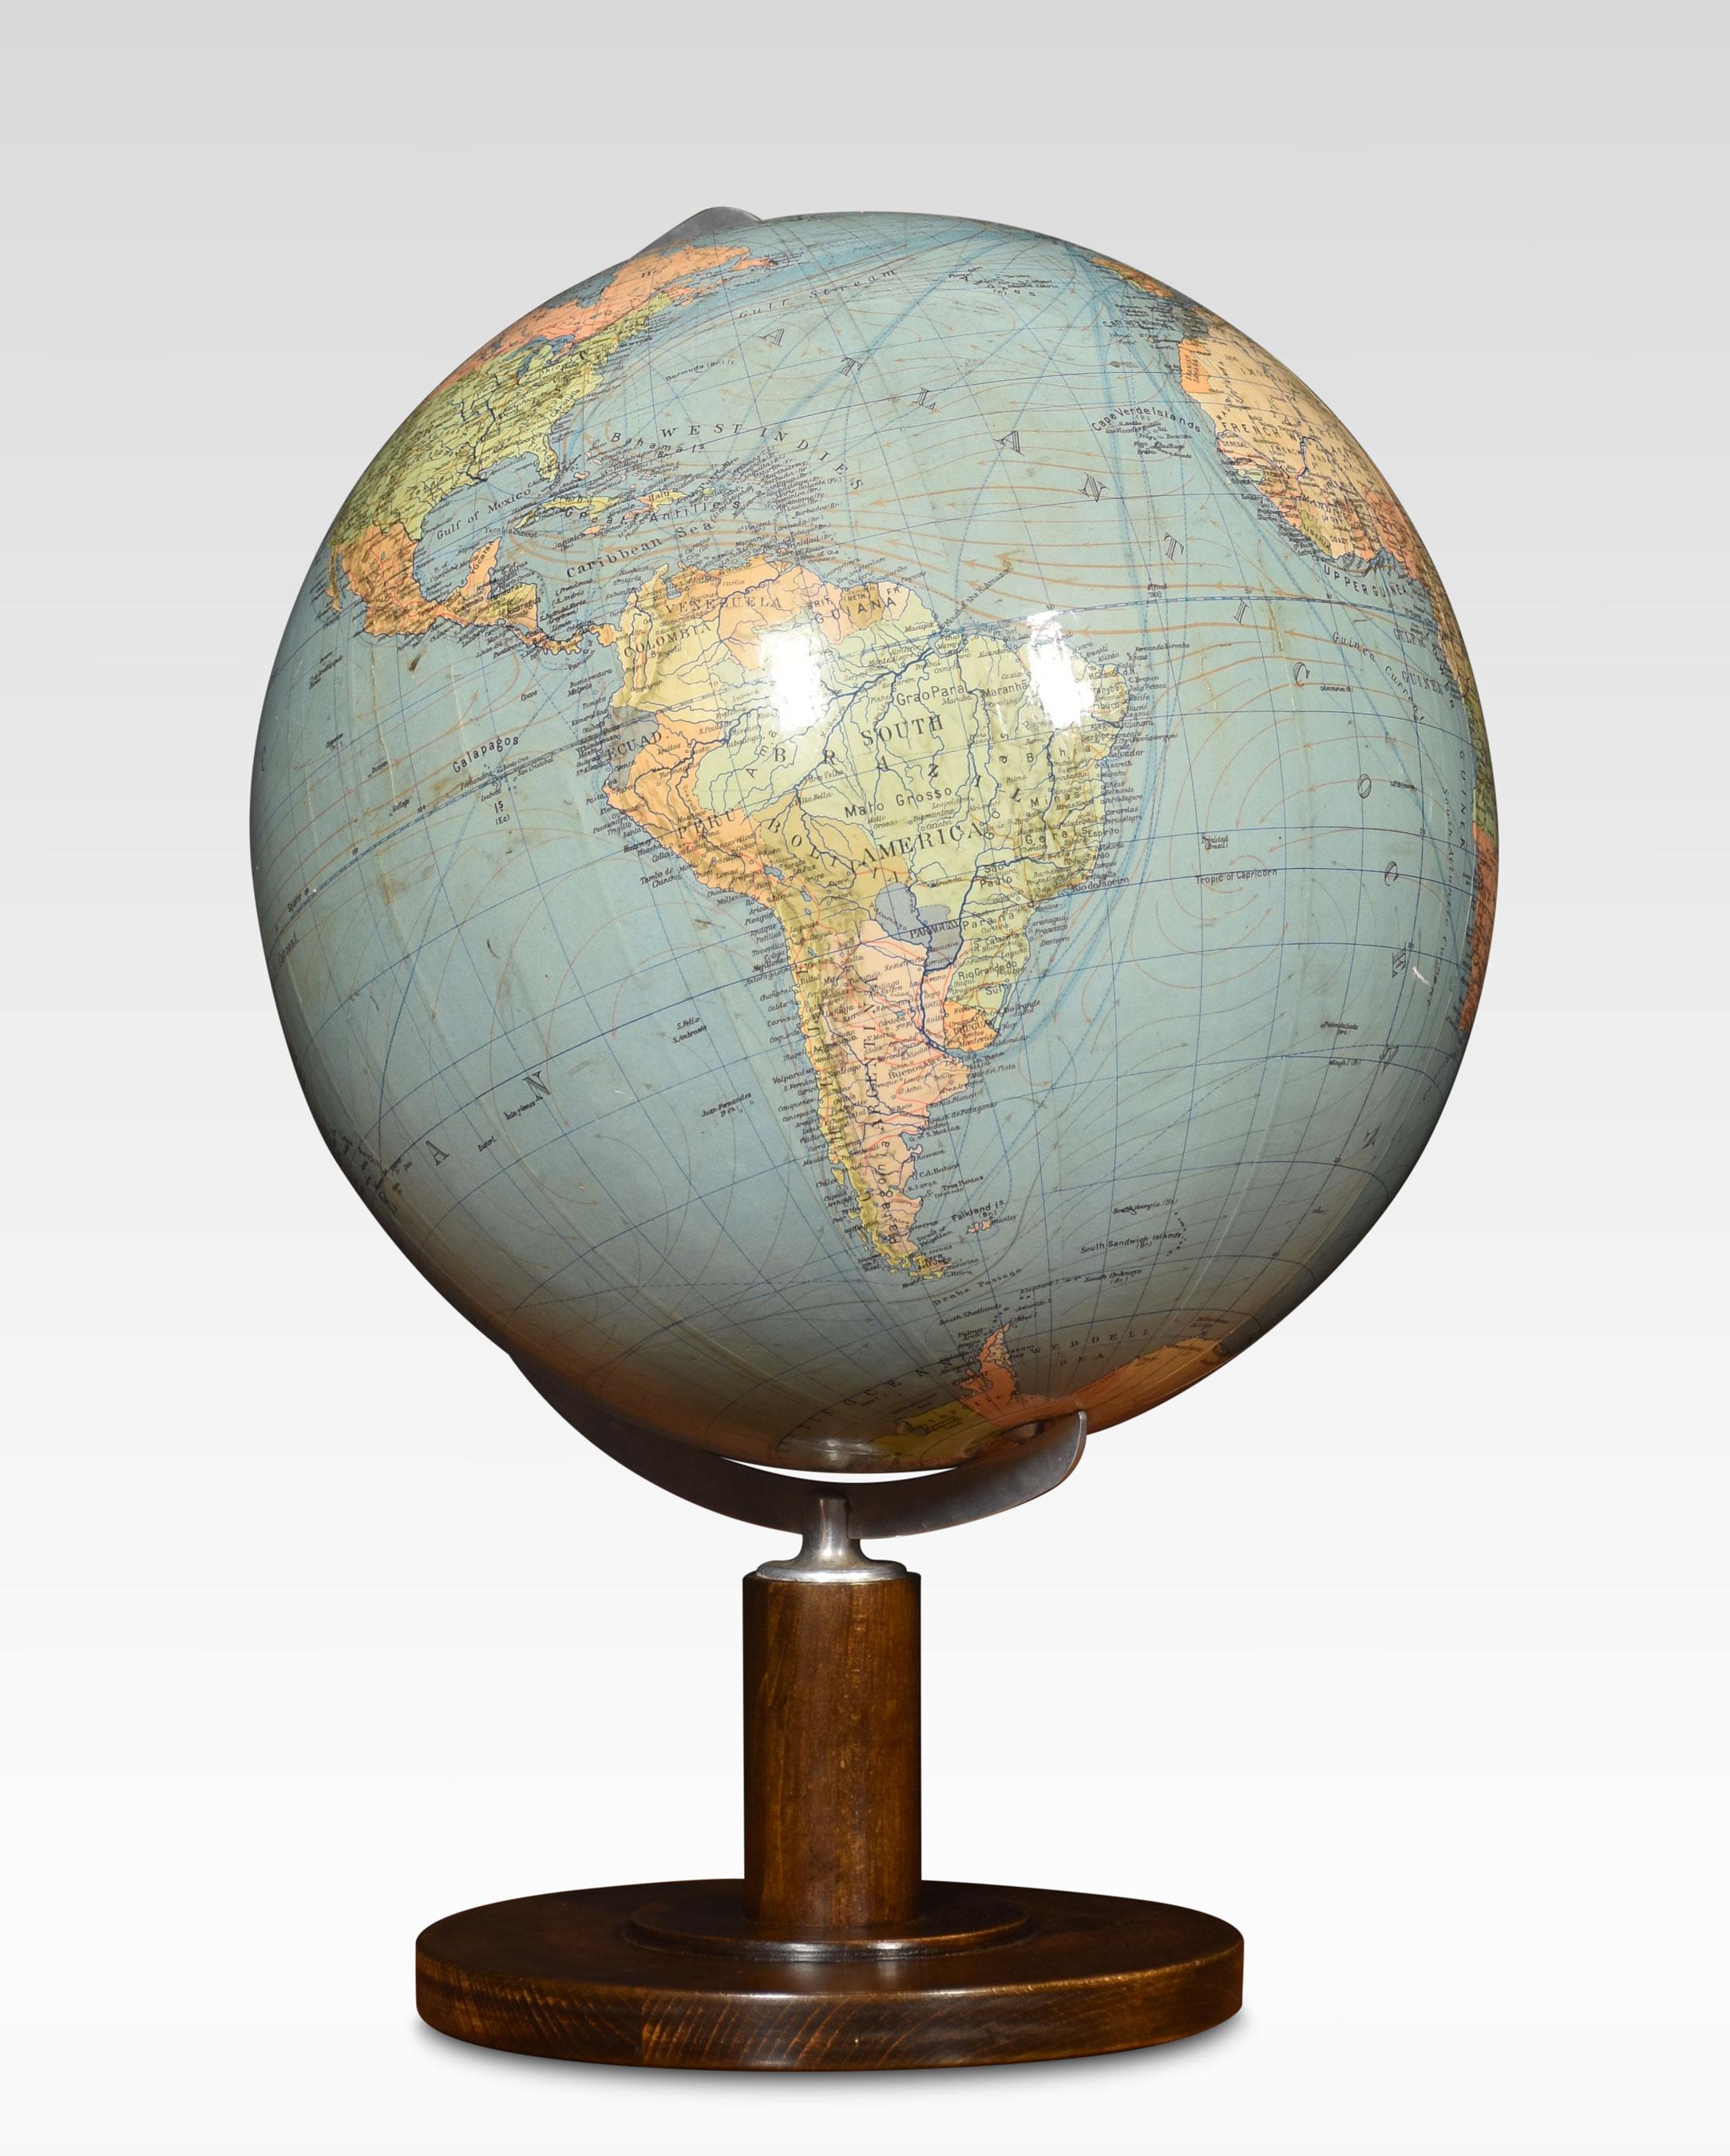 Columbus terrestrial globe raised up on circular base.
Dimensions
Height 19.5 Inches
Width 14.5 Inches
Depth 14.5 Inches.